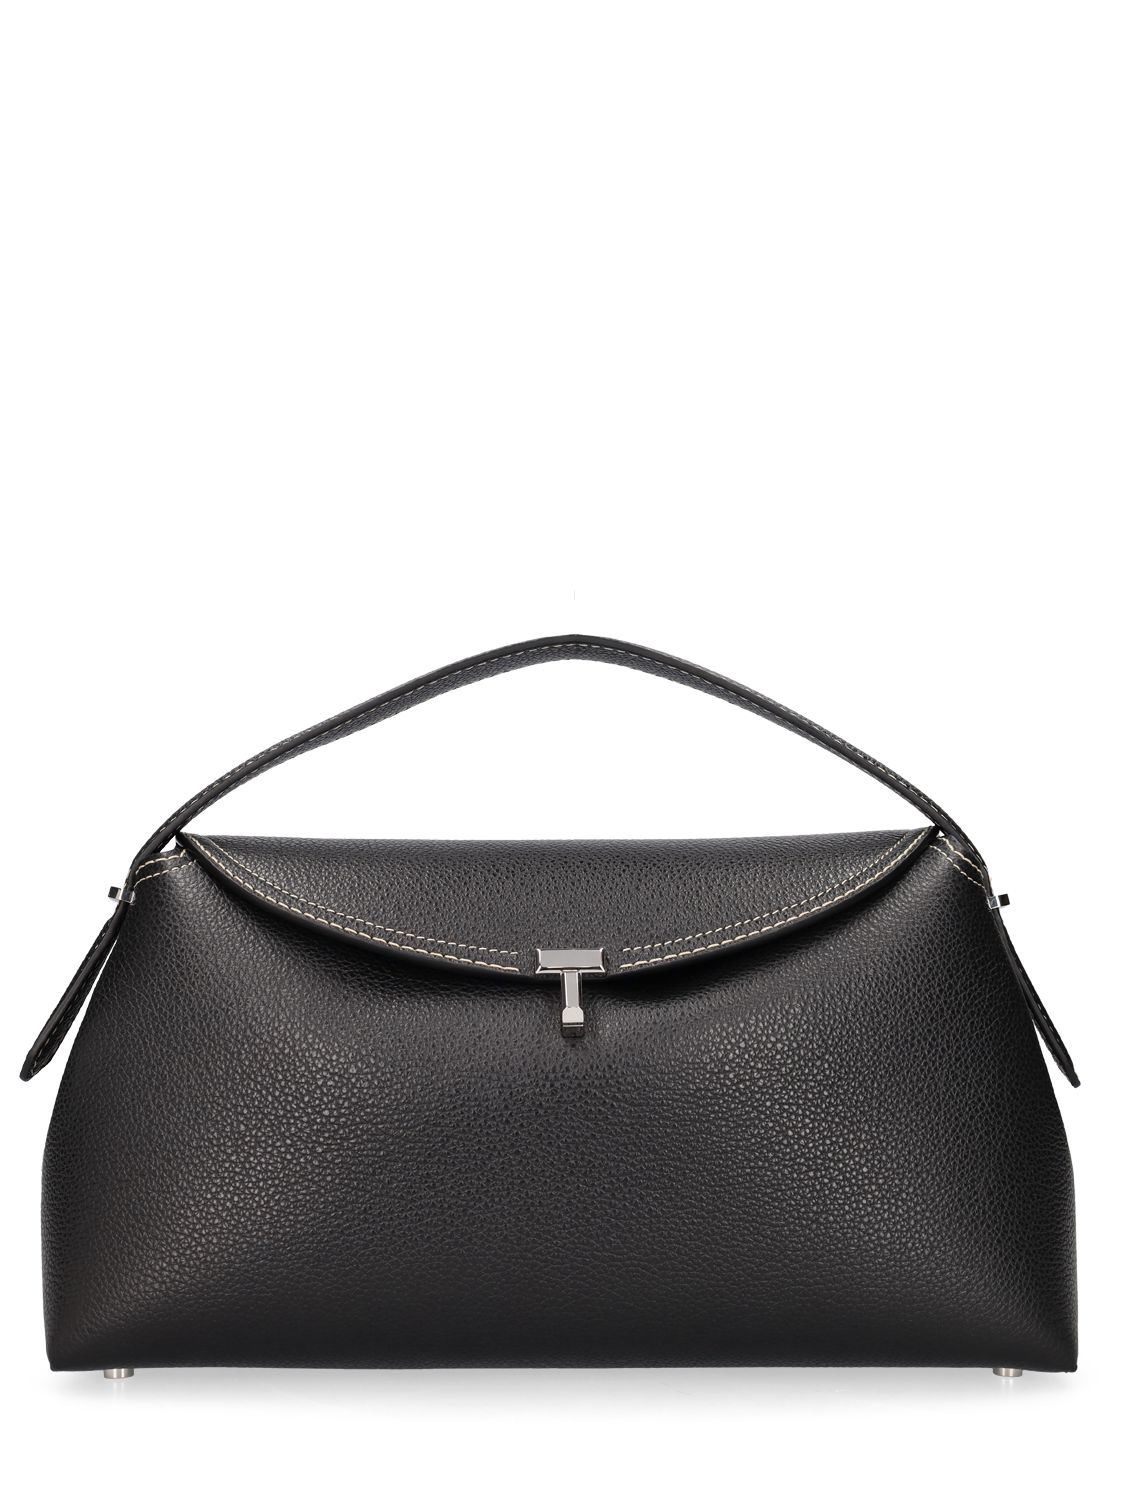 T-lock Leather Top Handle Bag